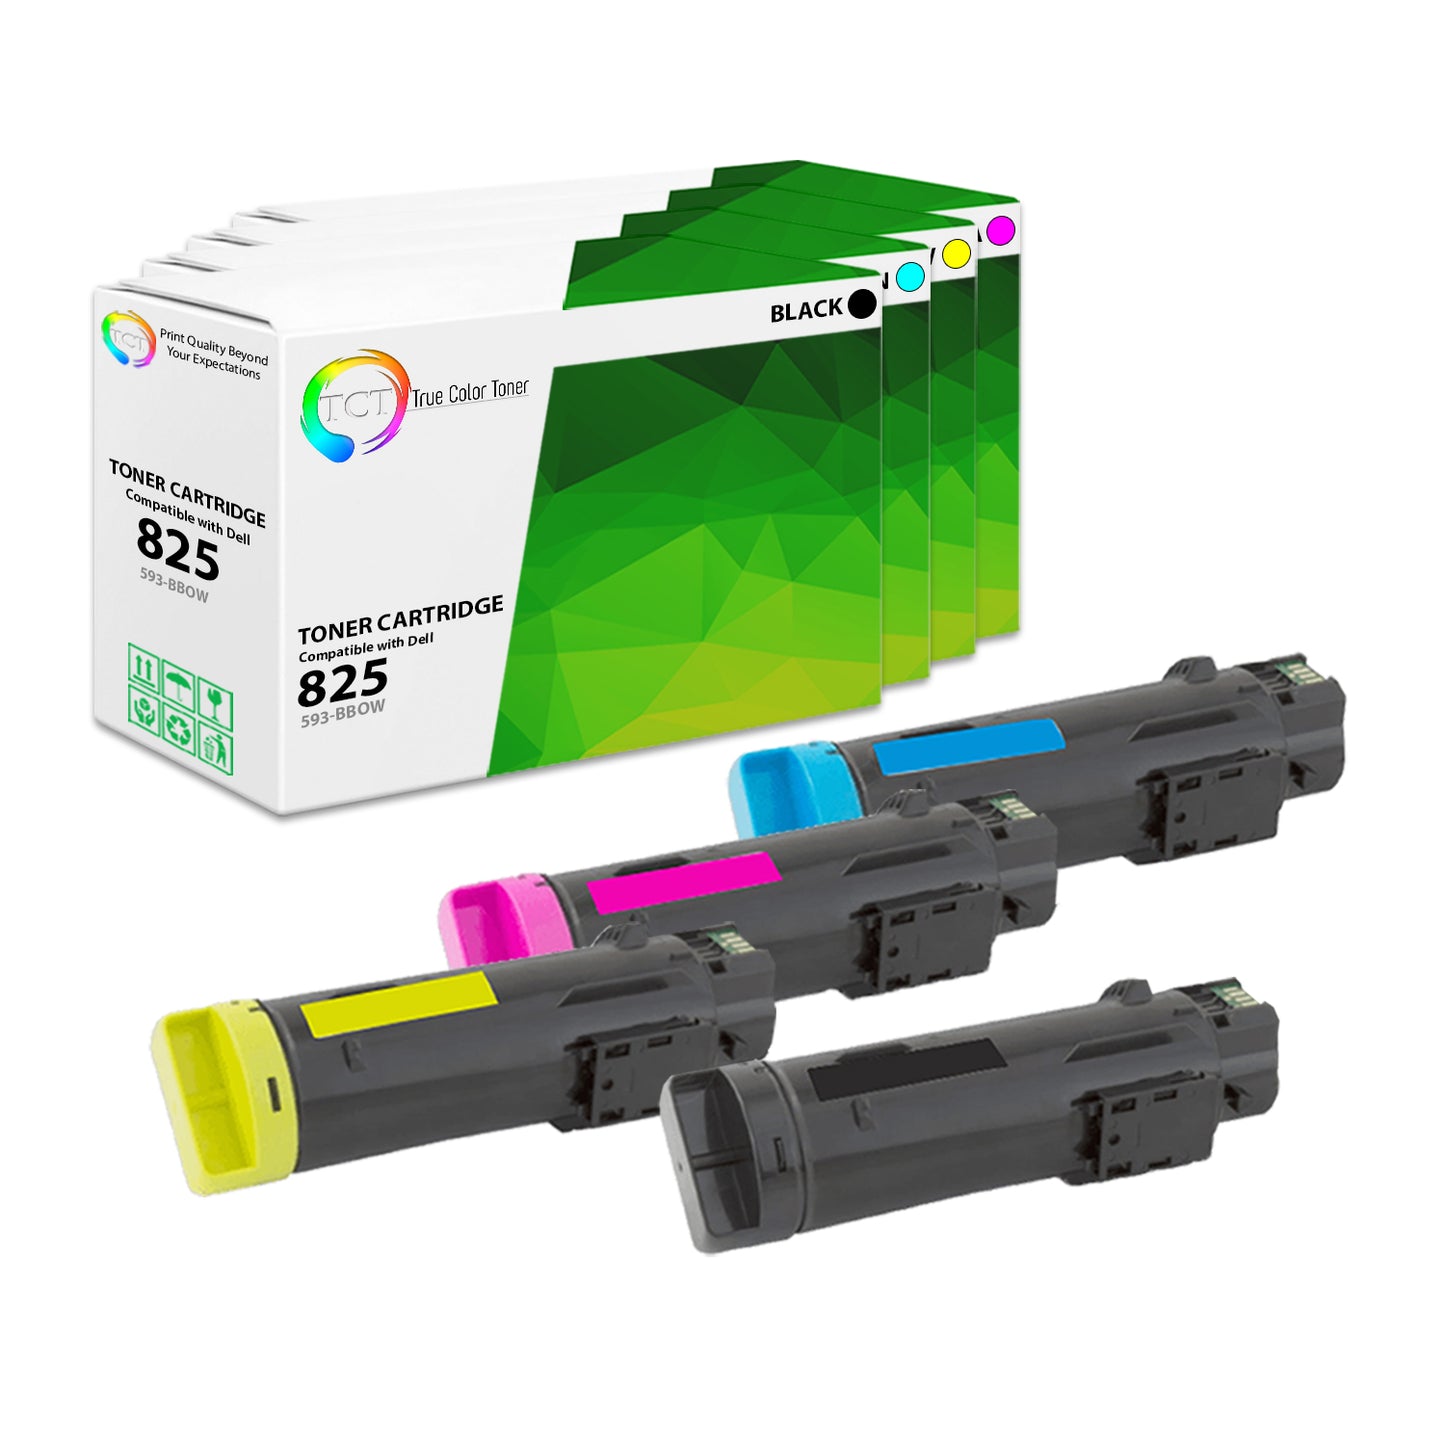 TCT Compatible Toner Cartridge Replacement for the Dell 825 Series - 4 Pack (BK, C, M, Y)